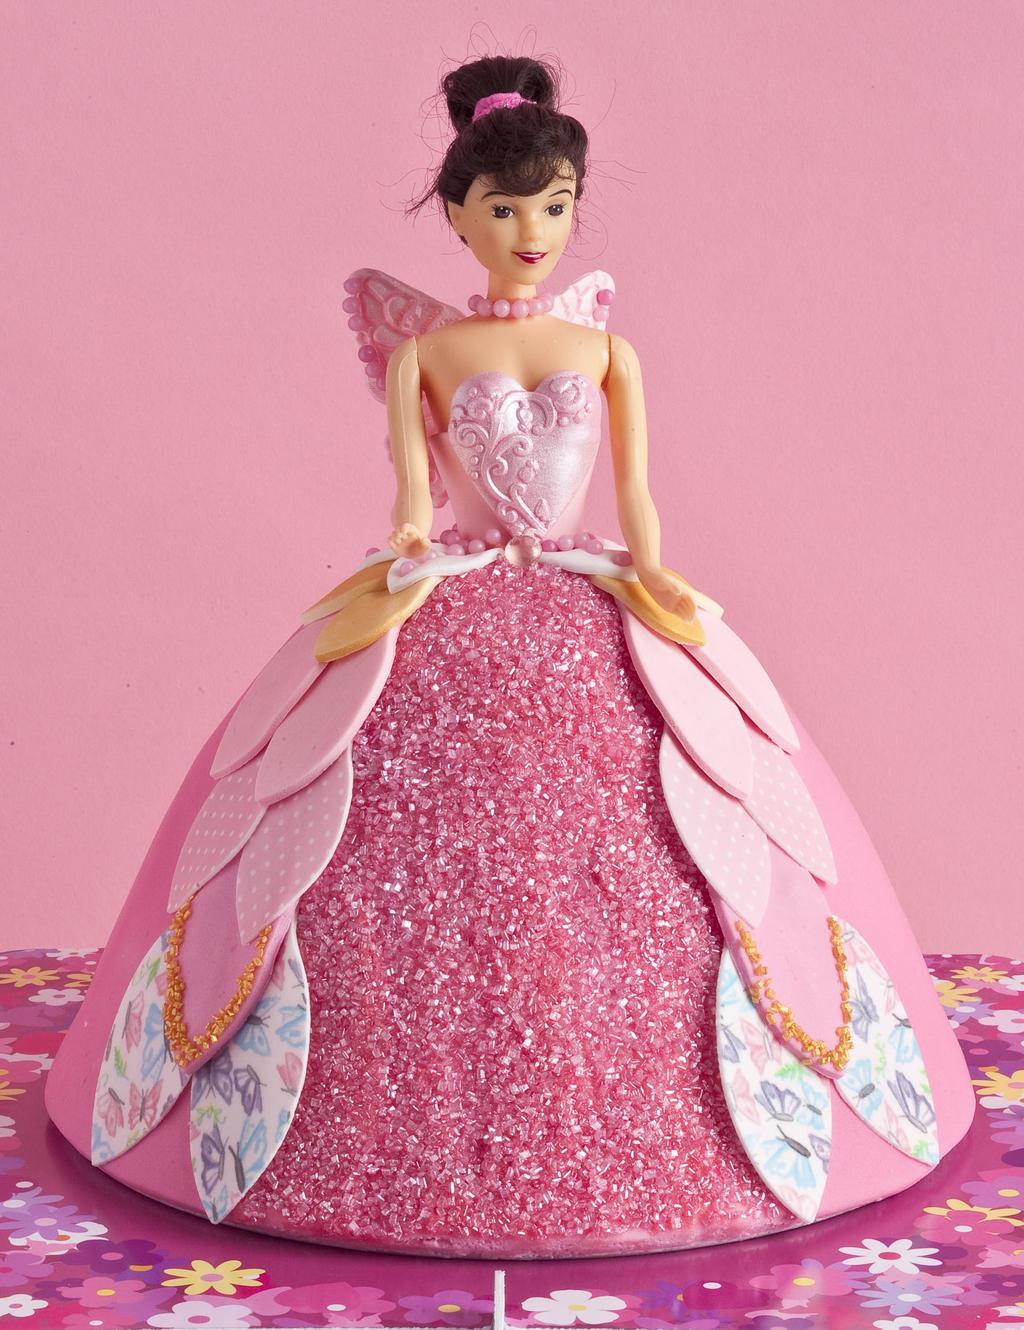 Princess Doll Cake You will need; Sponge cake baked in Wilton Wonder Mould Pan (includes doll set) Butter icing to cover cake 8 round cake board Professional Pink Regalice Sugar Paste Shell Pink